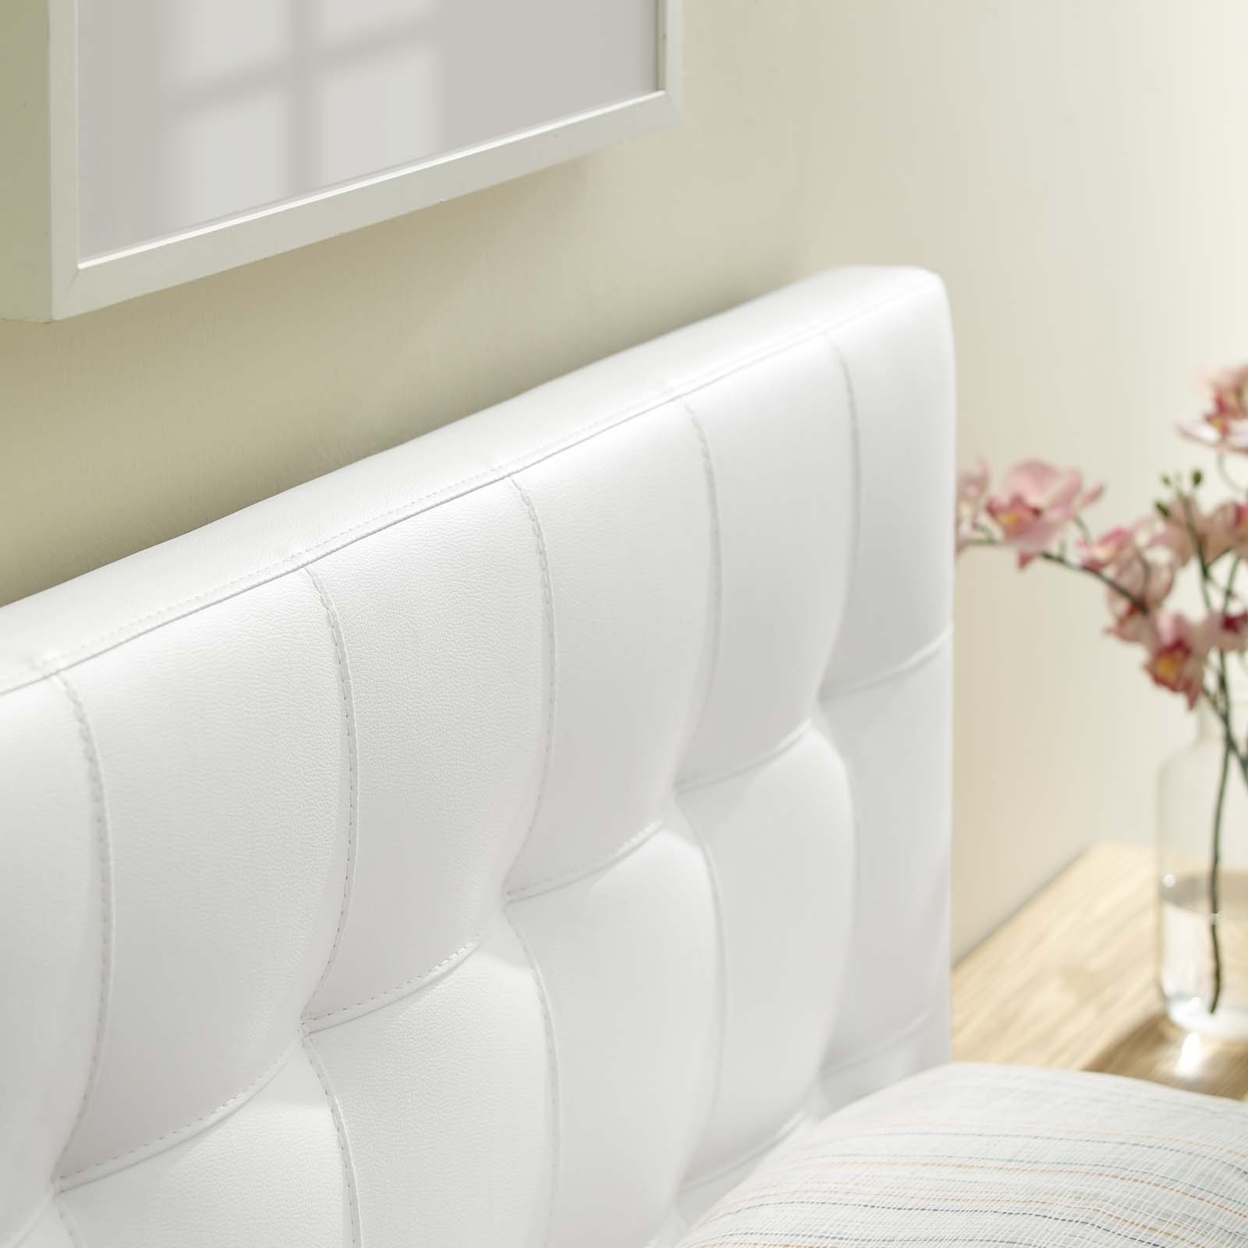 Modway Lily Twin Upholstered Faux Leather and Wood Headboard in White - image 4 of 5